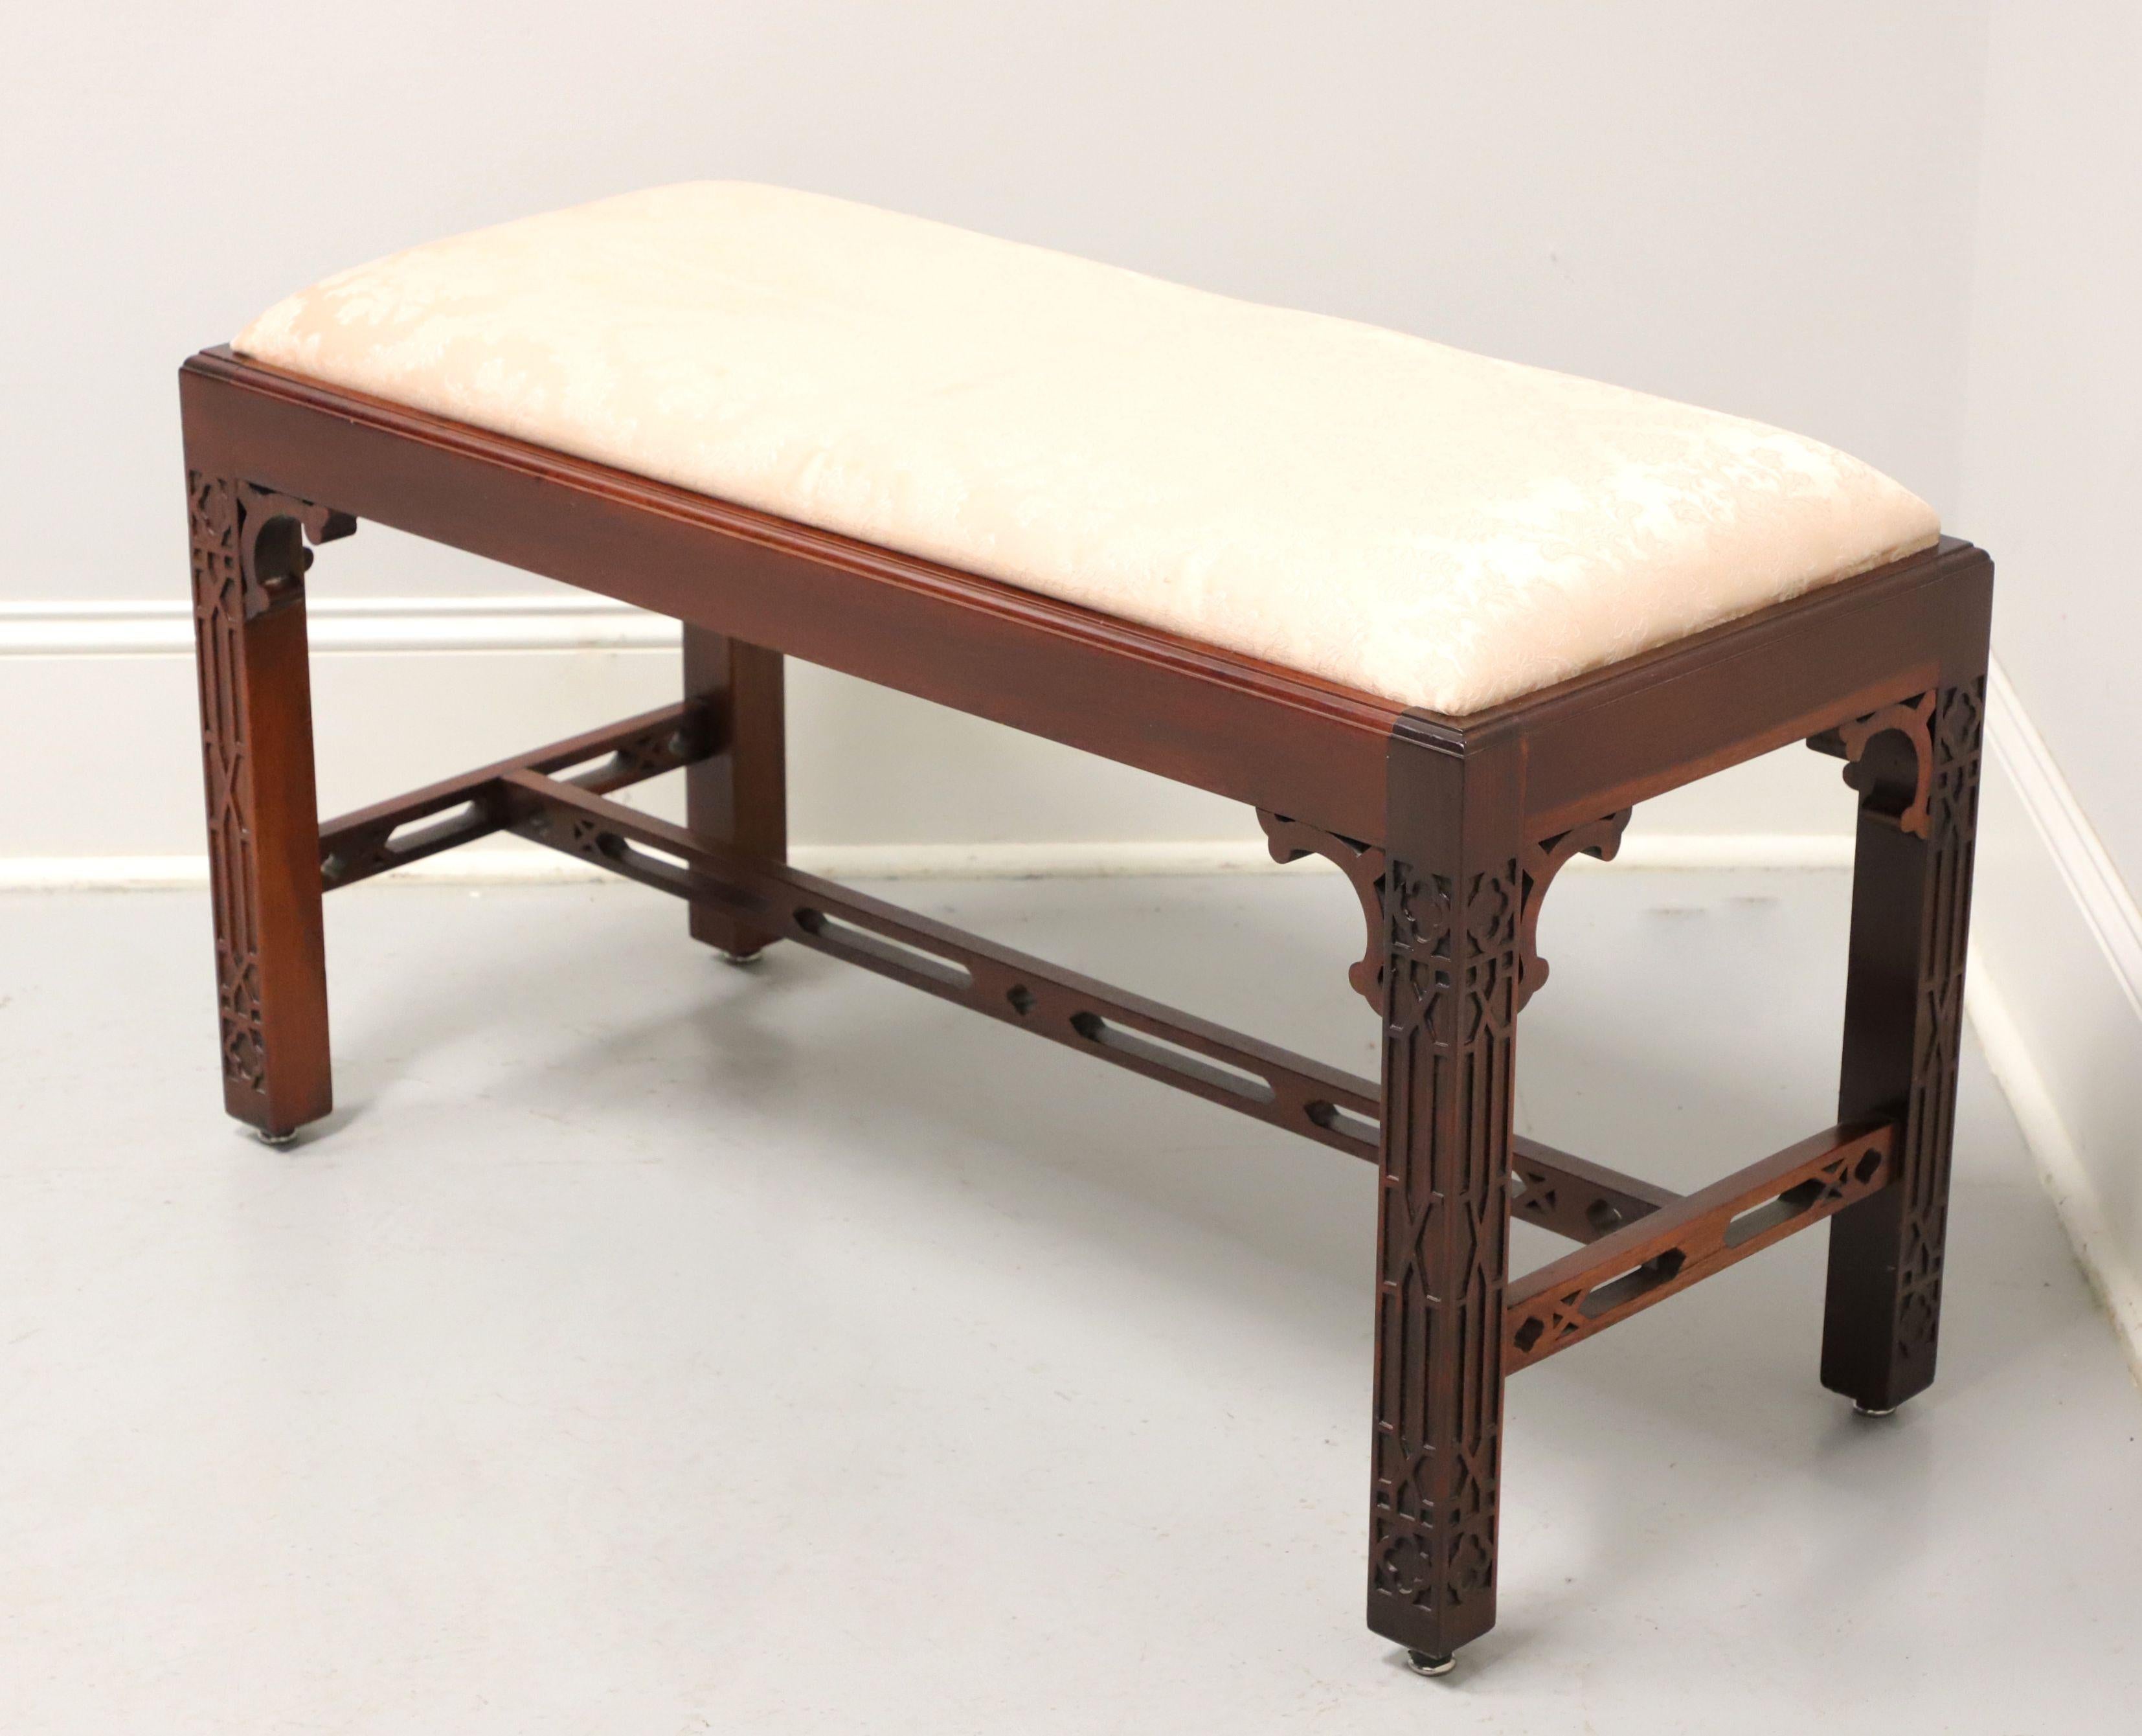 American BAKER Cliveden Place Mahogany Chippendale Style Fretwork Bench